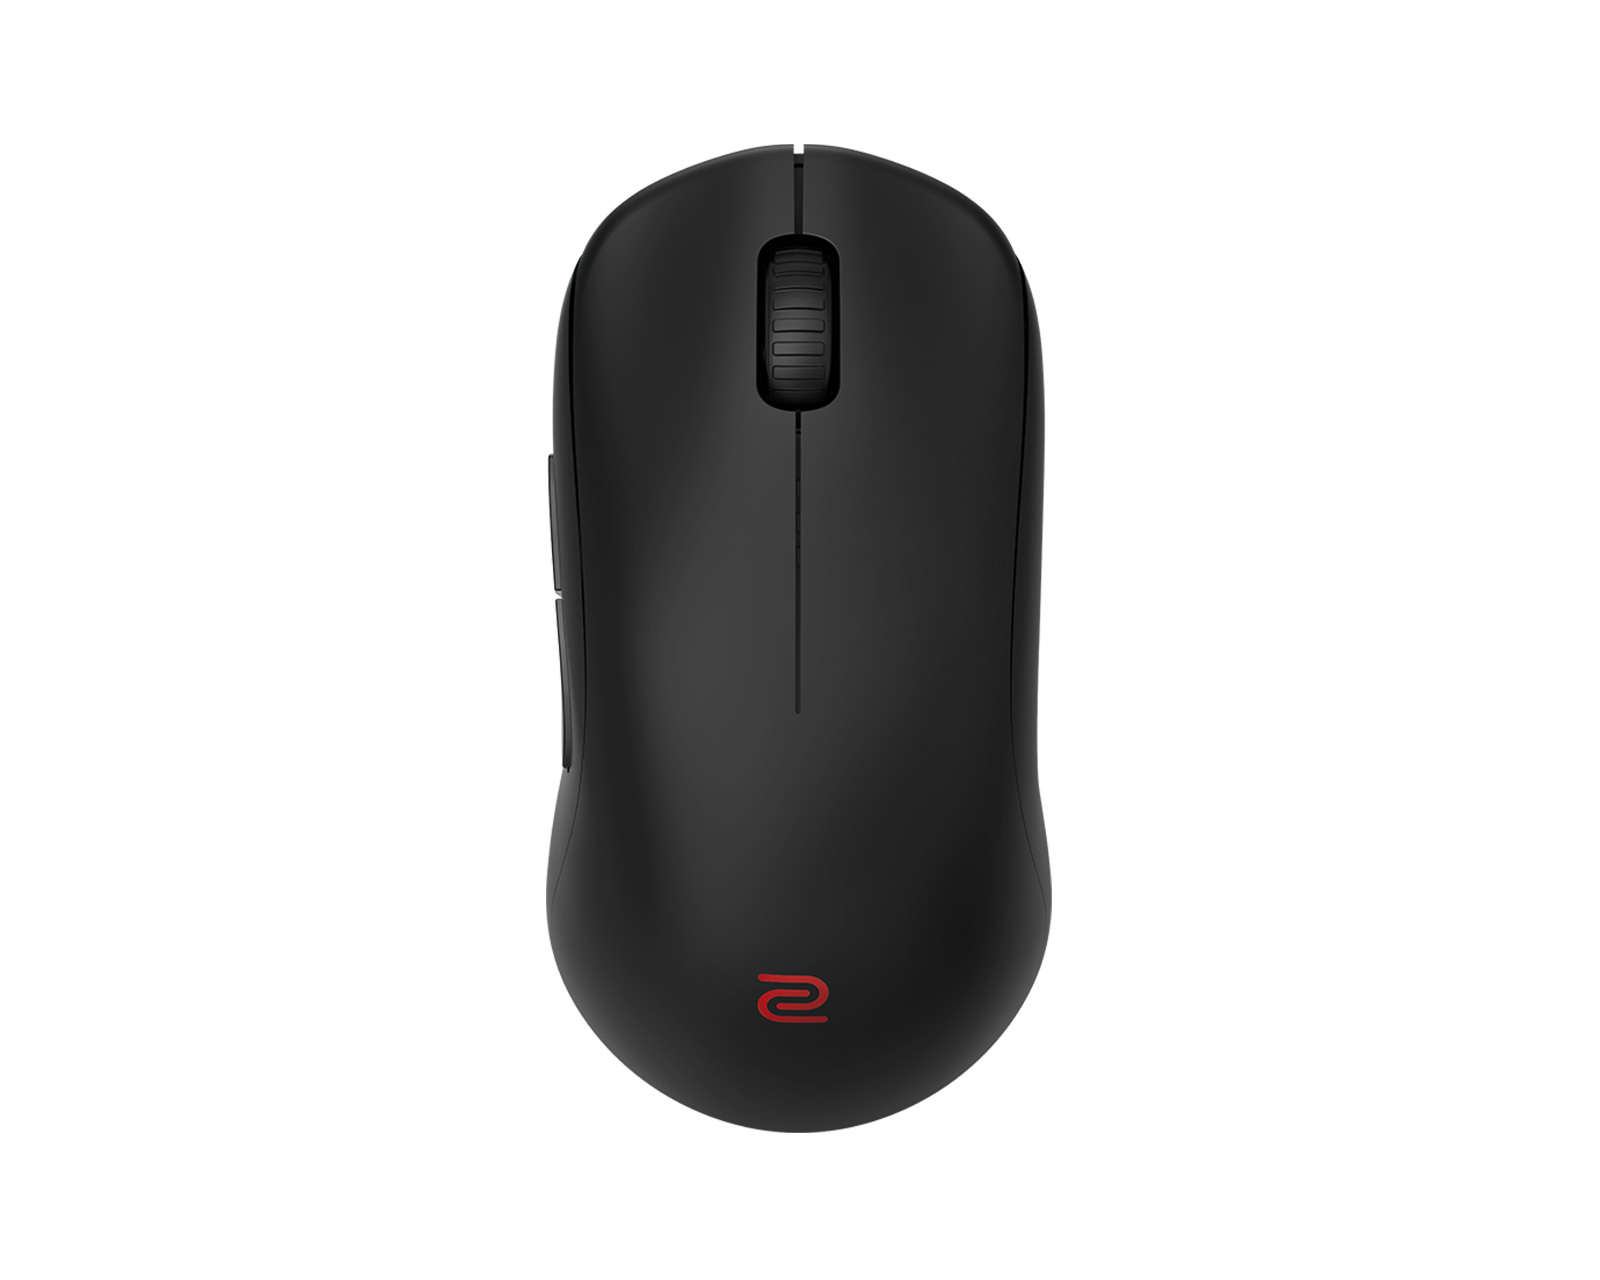 HP 150 Wireless Mouse under 500 